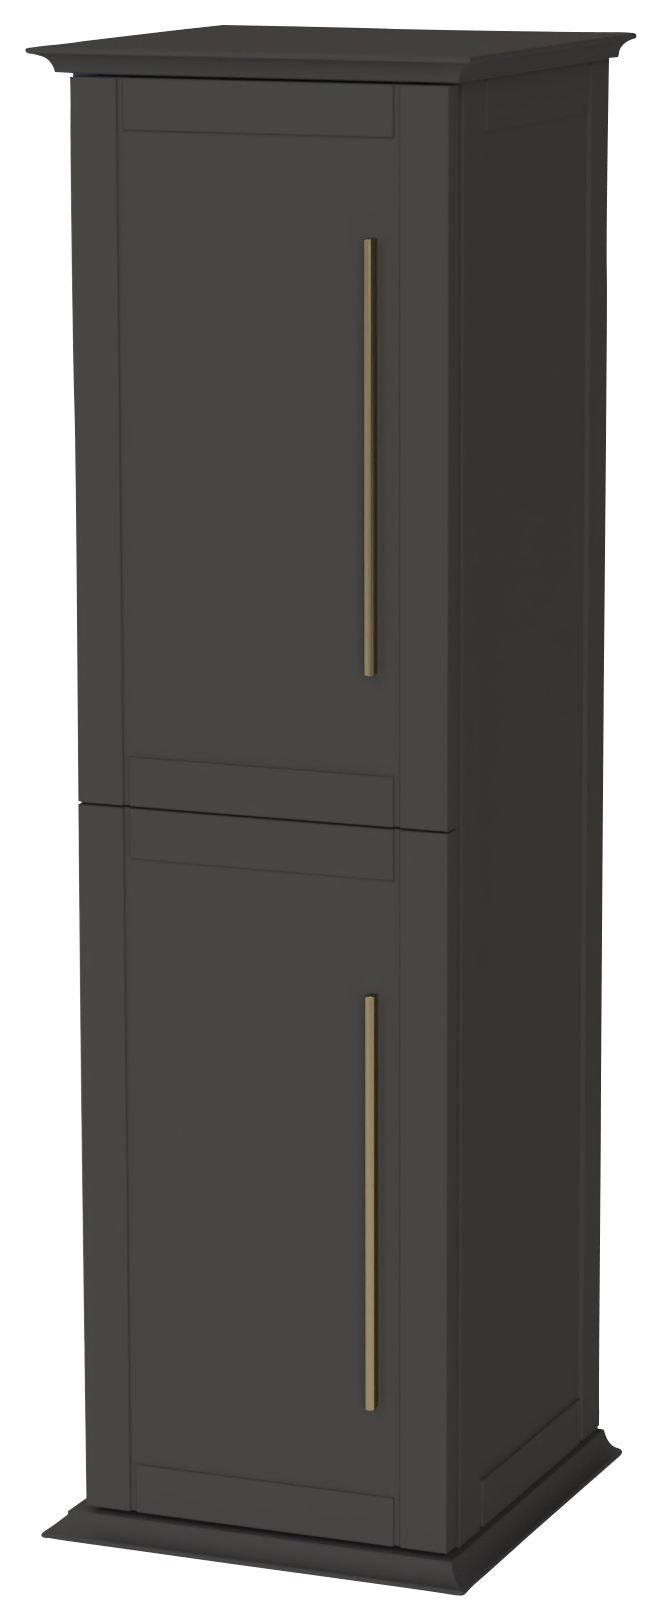 Duarti by Calypso Kentchurch Strata Grey Wall Hung Tower with Brass Handles - 340mm